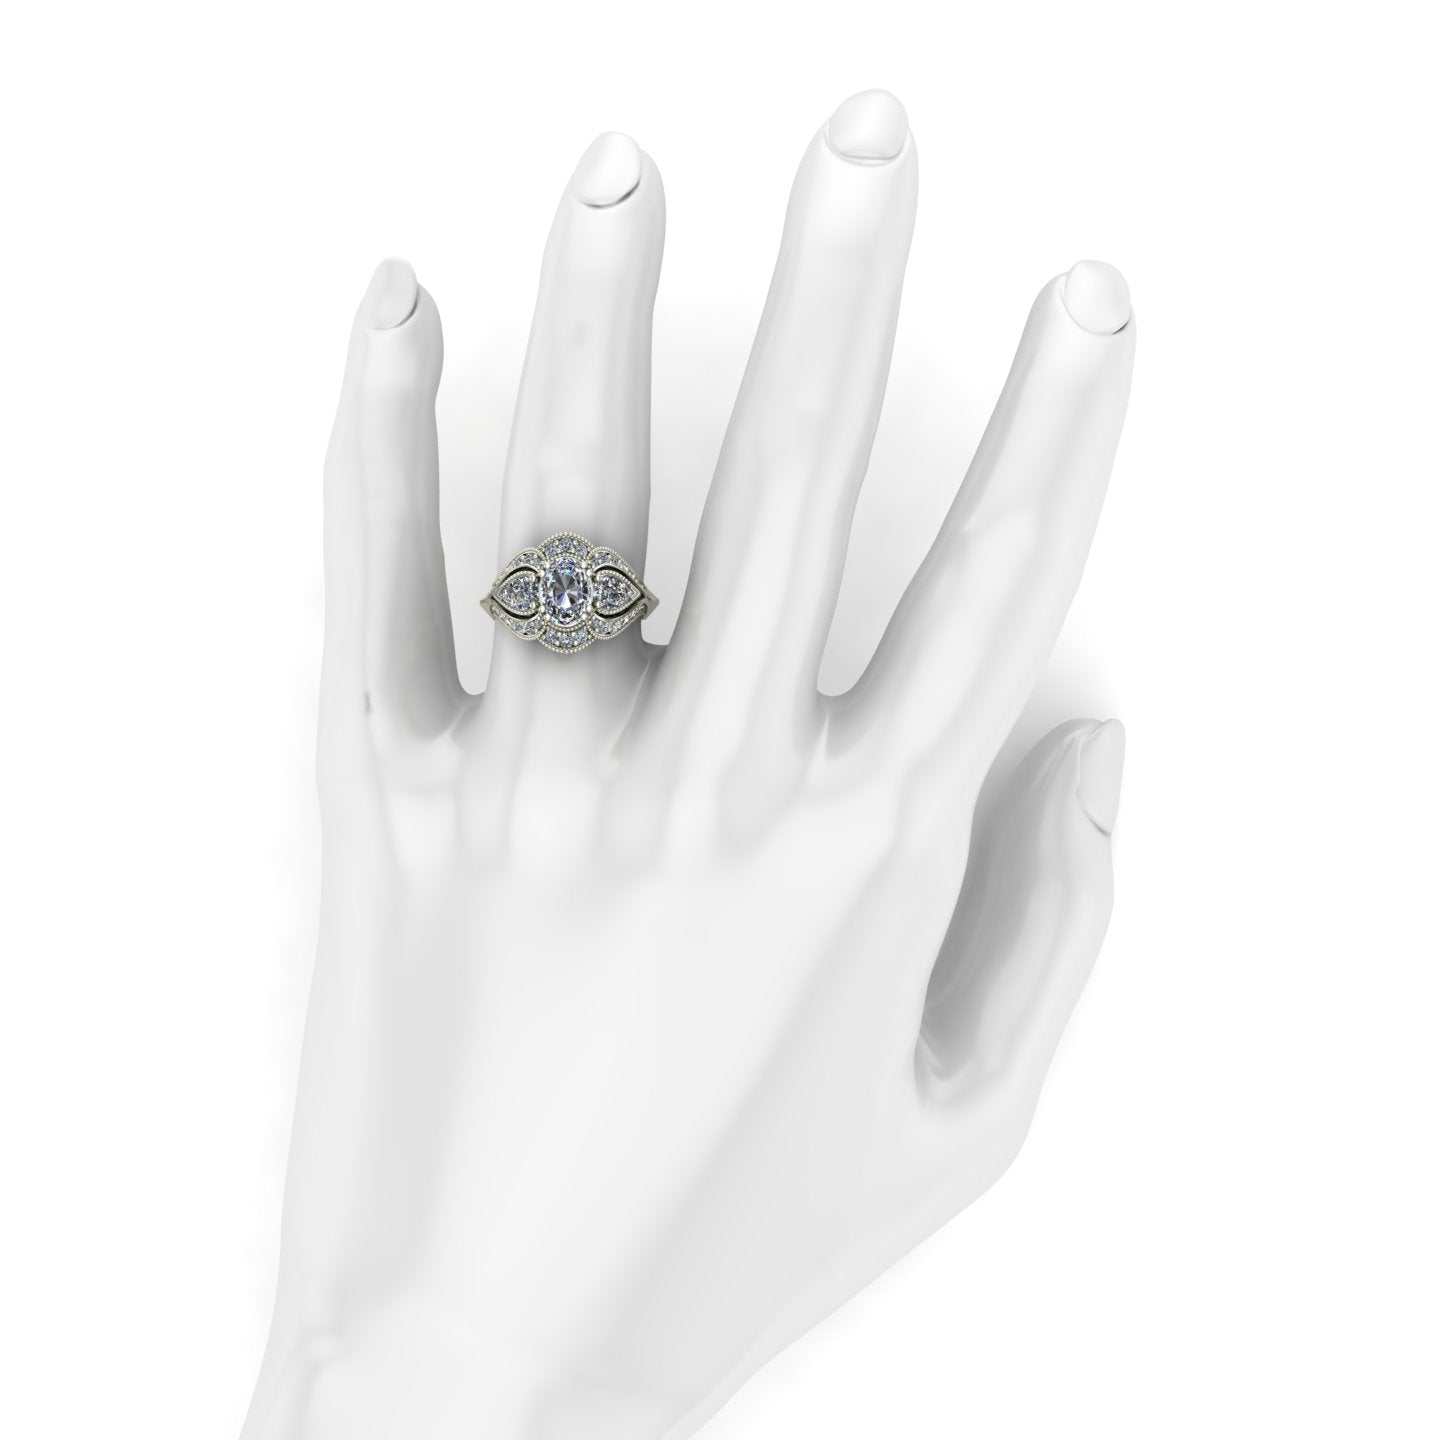 Oval and pear diamond engagement ring in 18k white gold - Charles Babb Designs - on hand